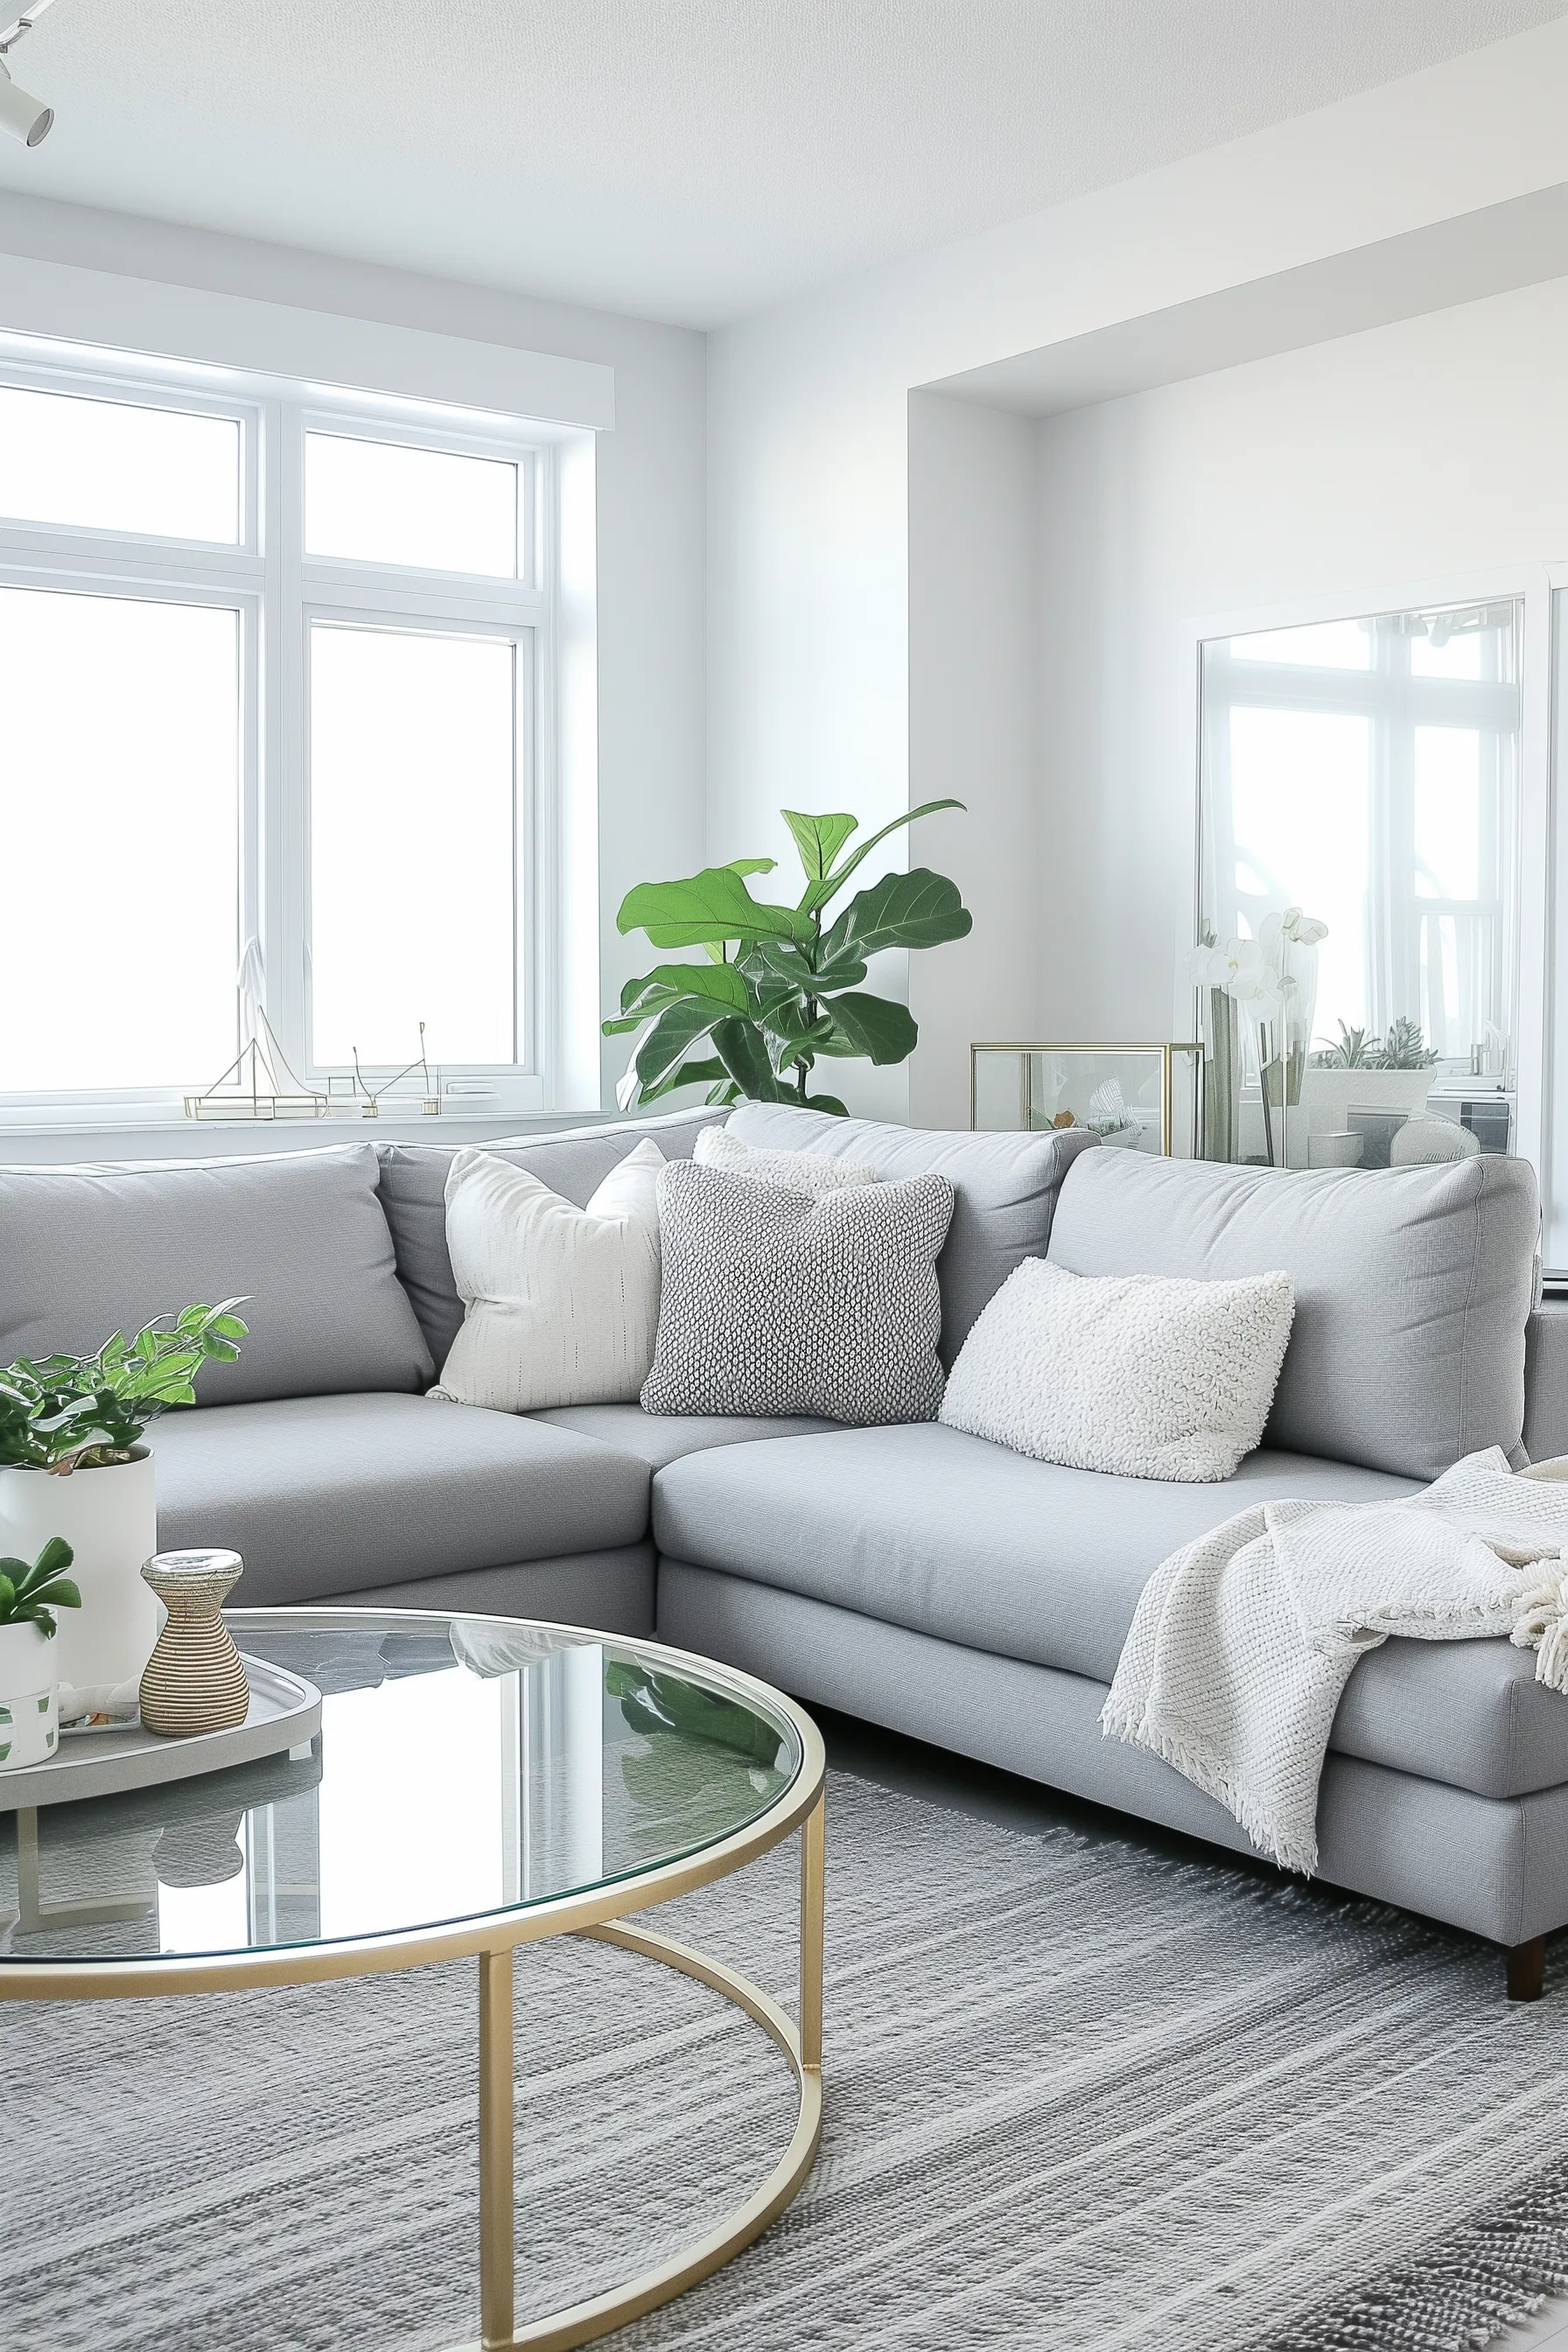 A grey sofa with a glass coffee table and plants.